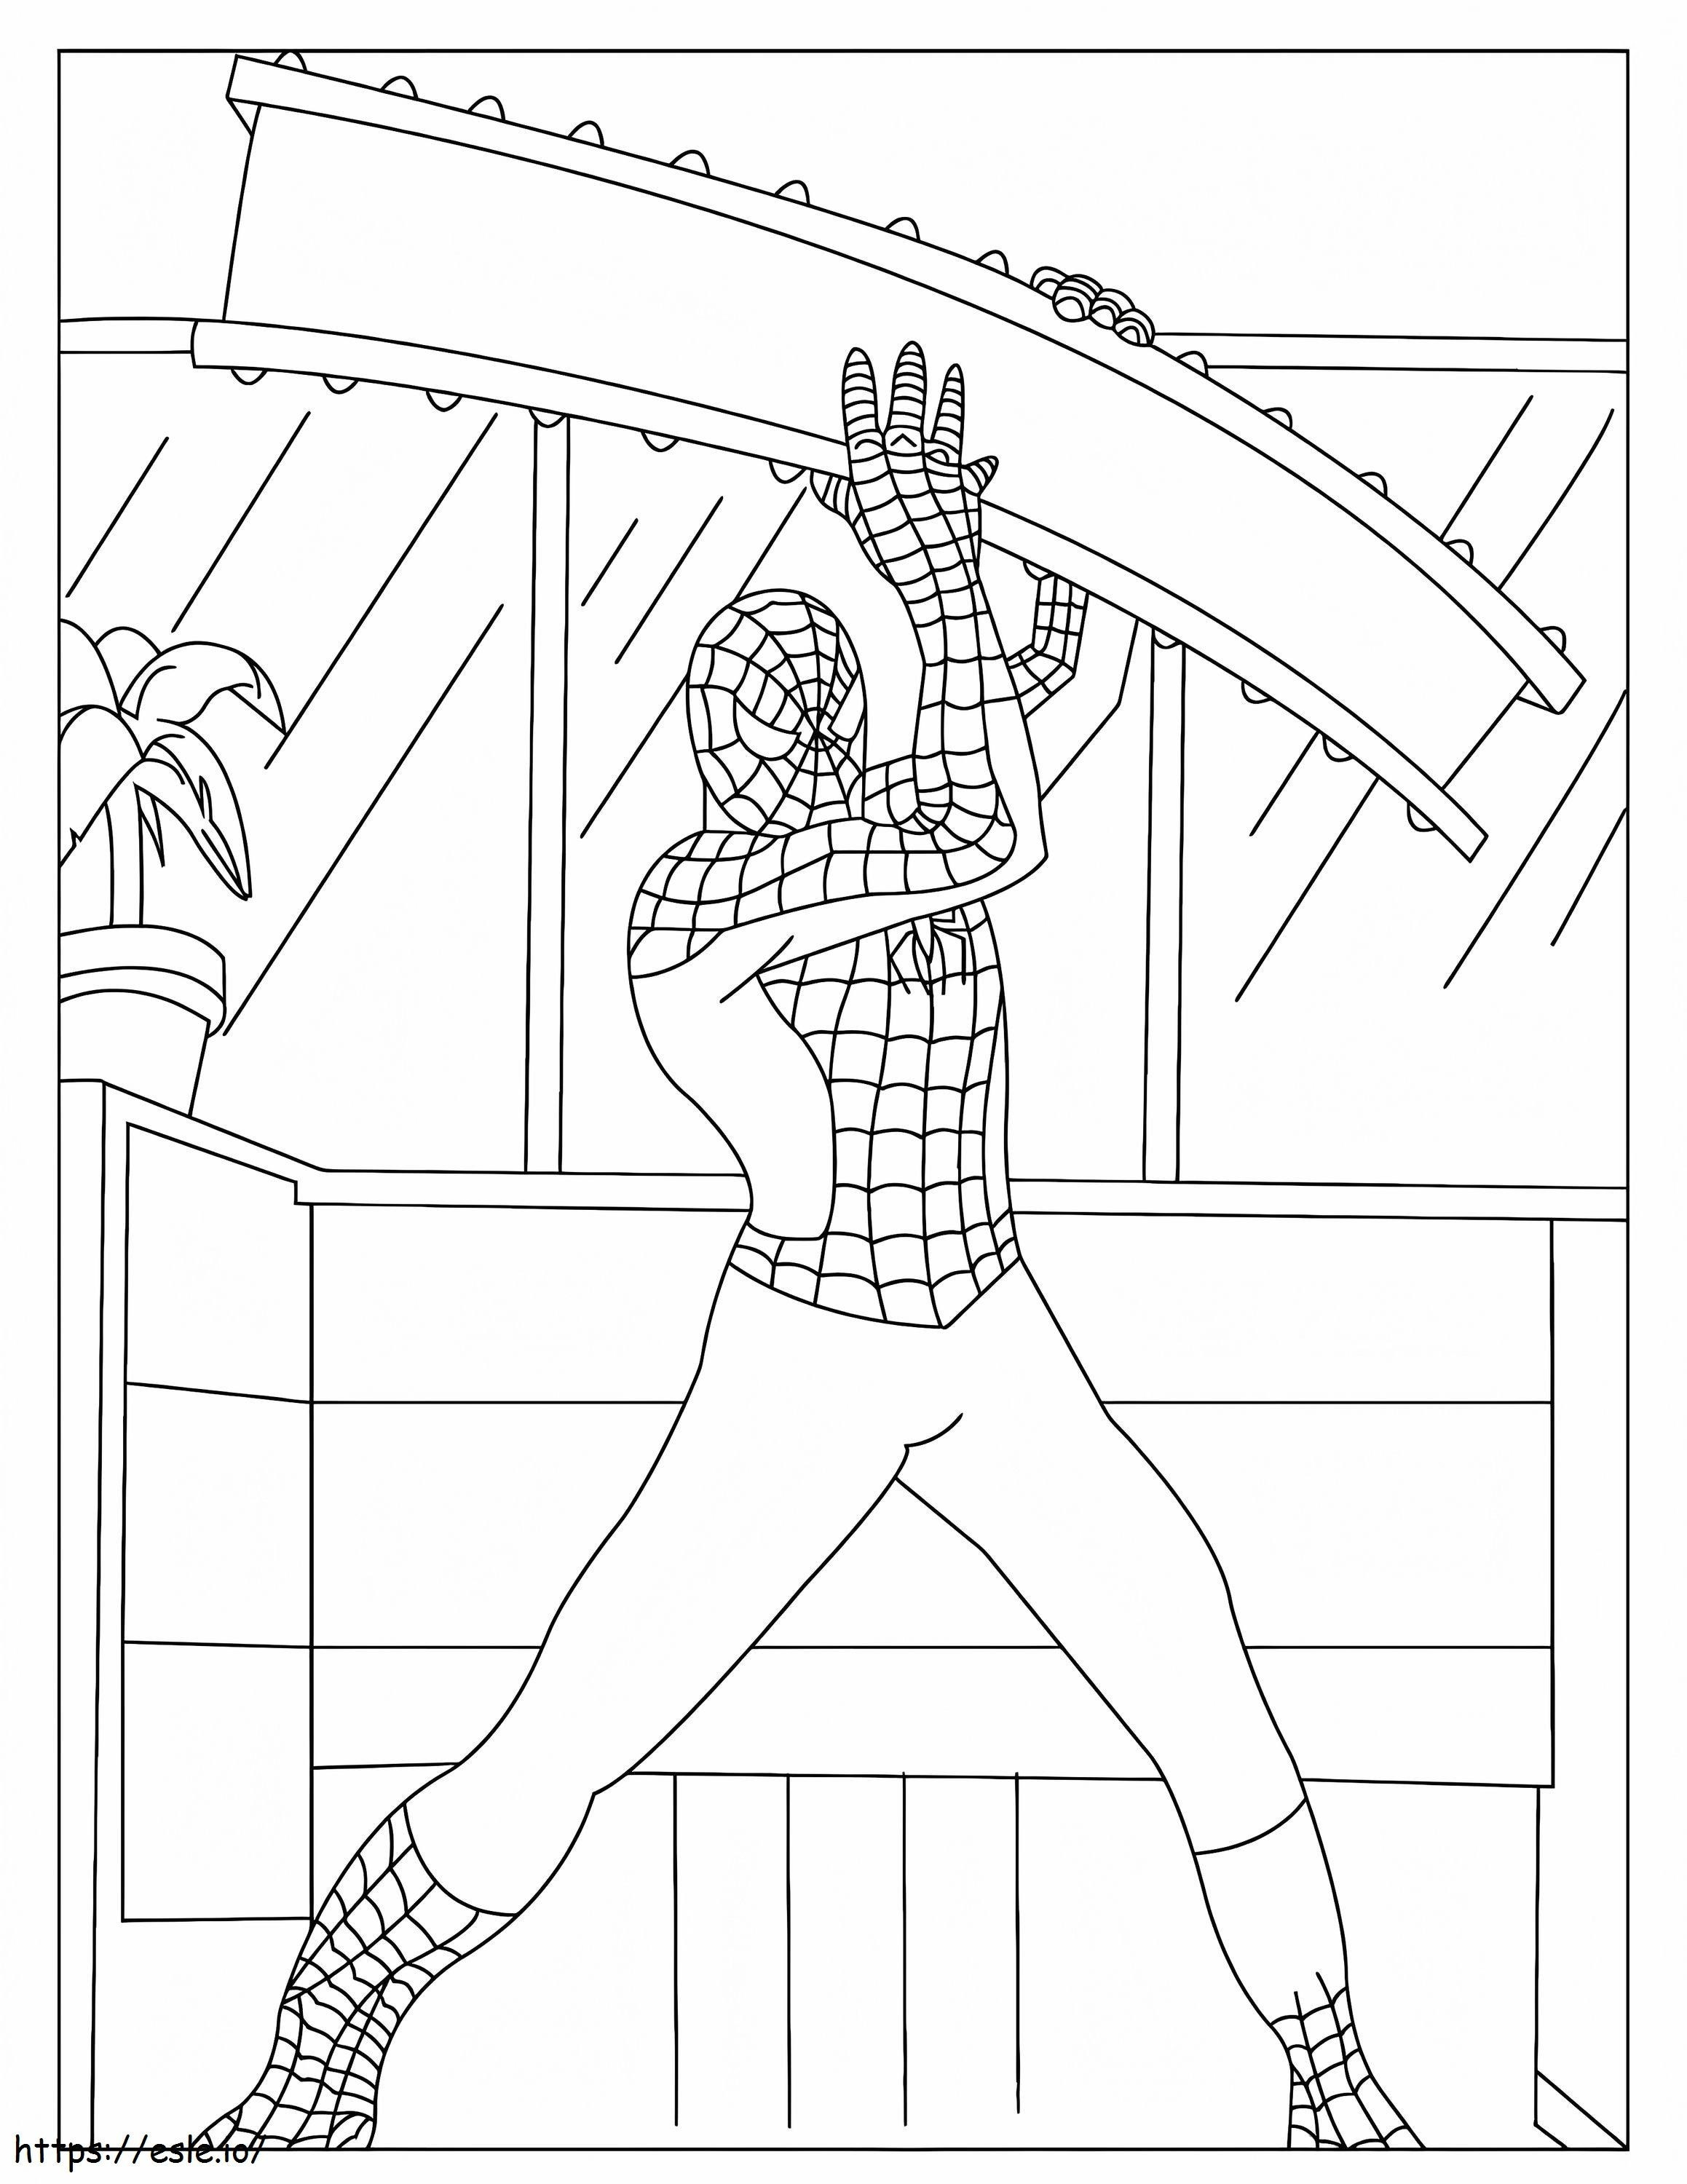 Spider Man Holding Gun coloring page